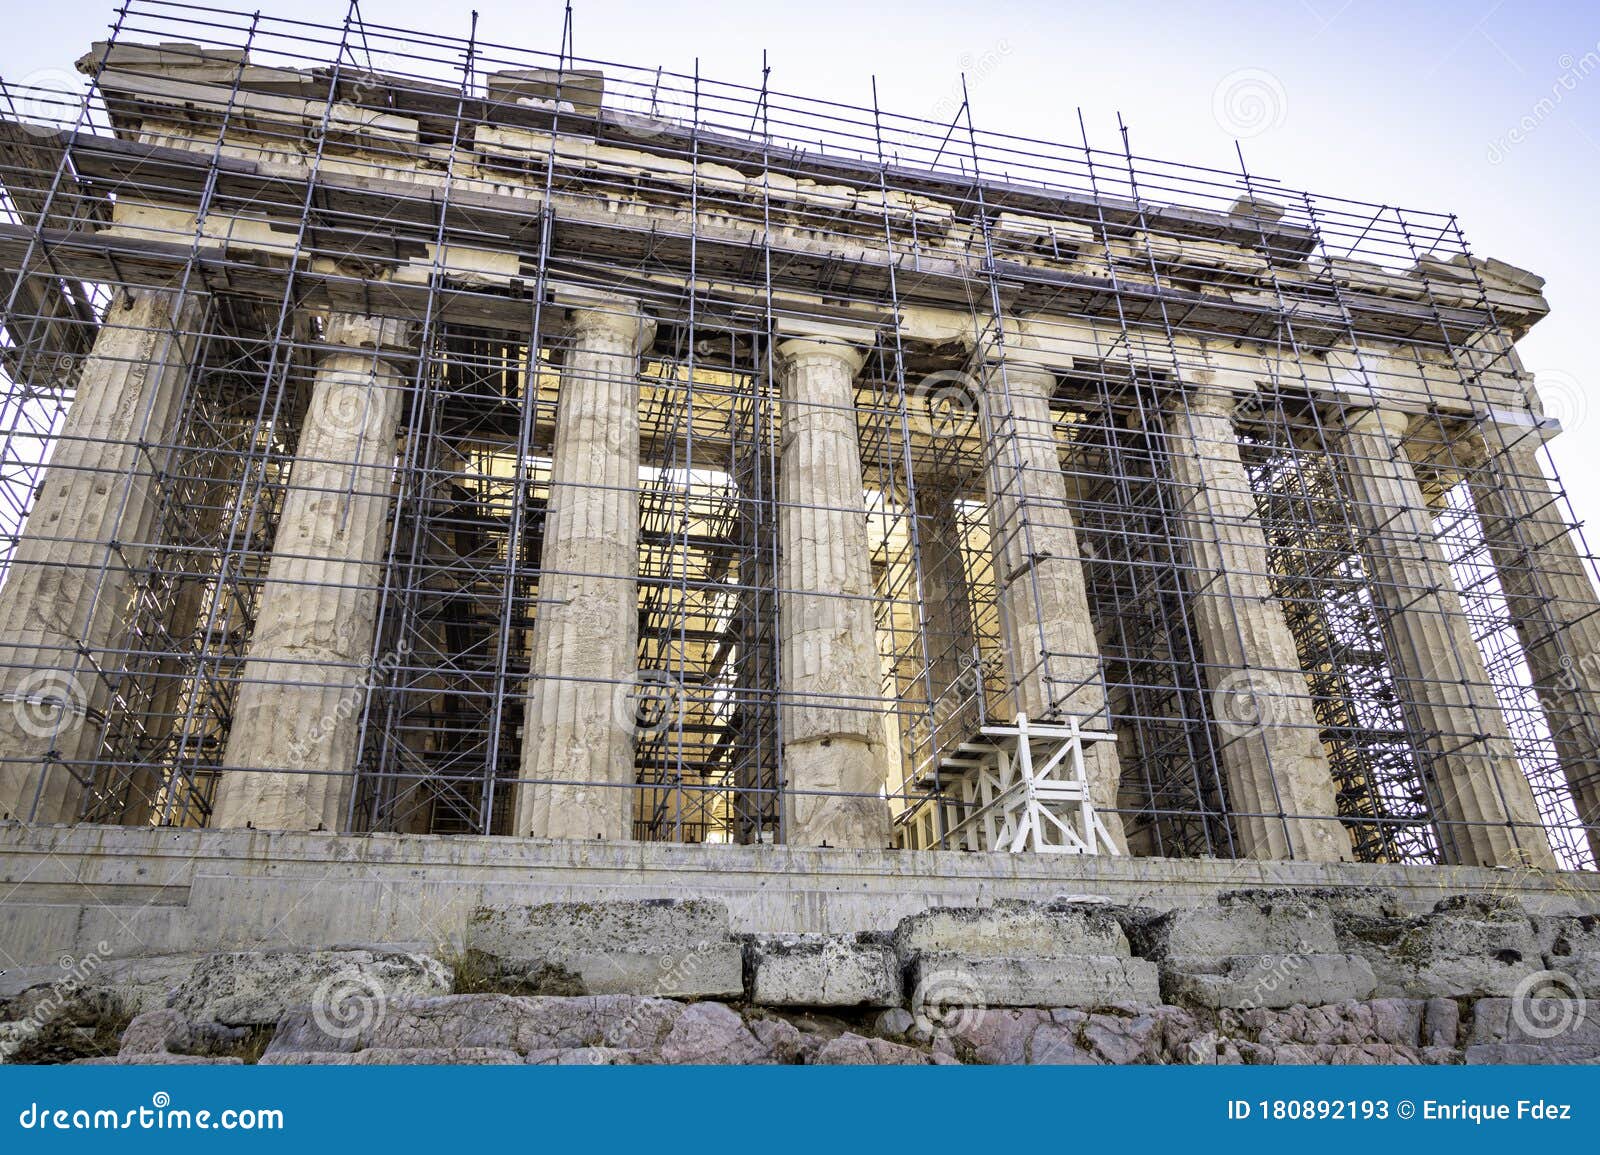 view of the facade of the partenon in athens surrounded by scaffolding, greece